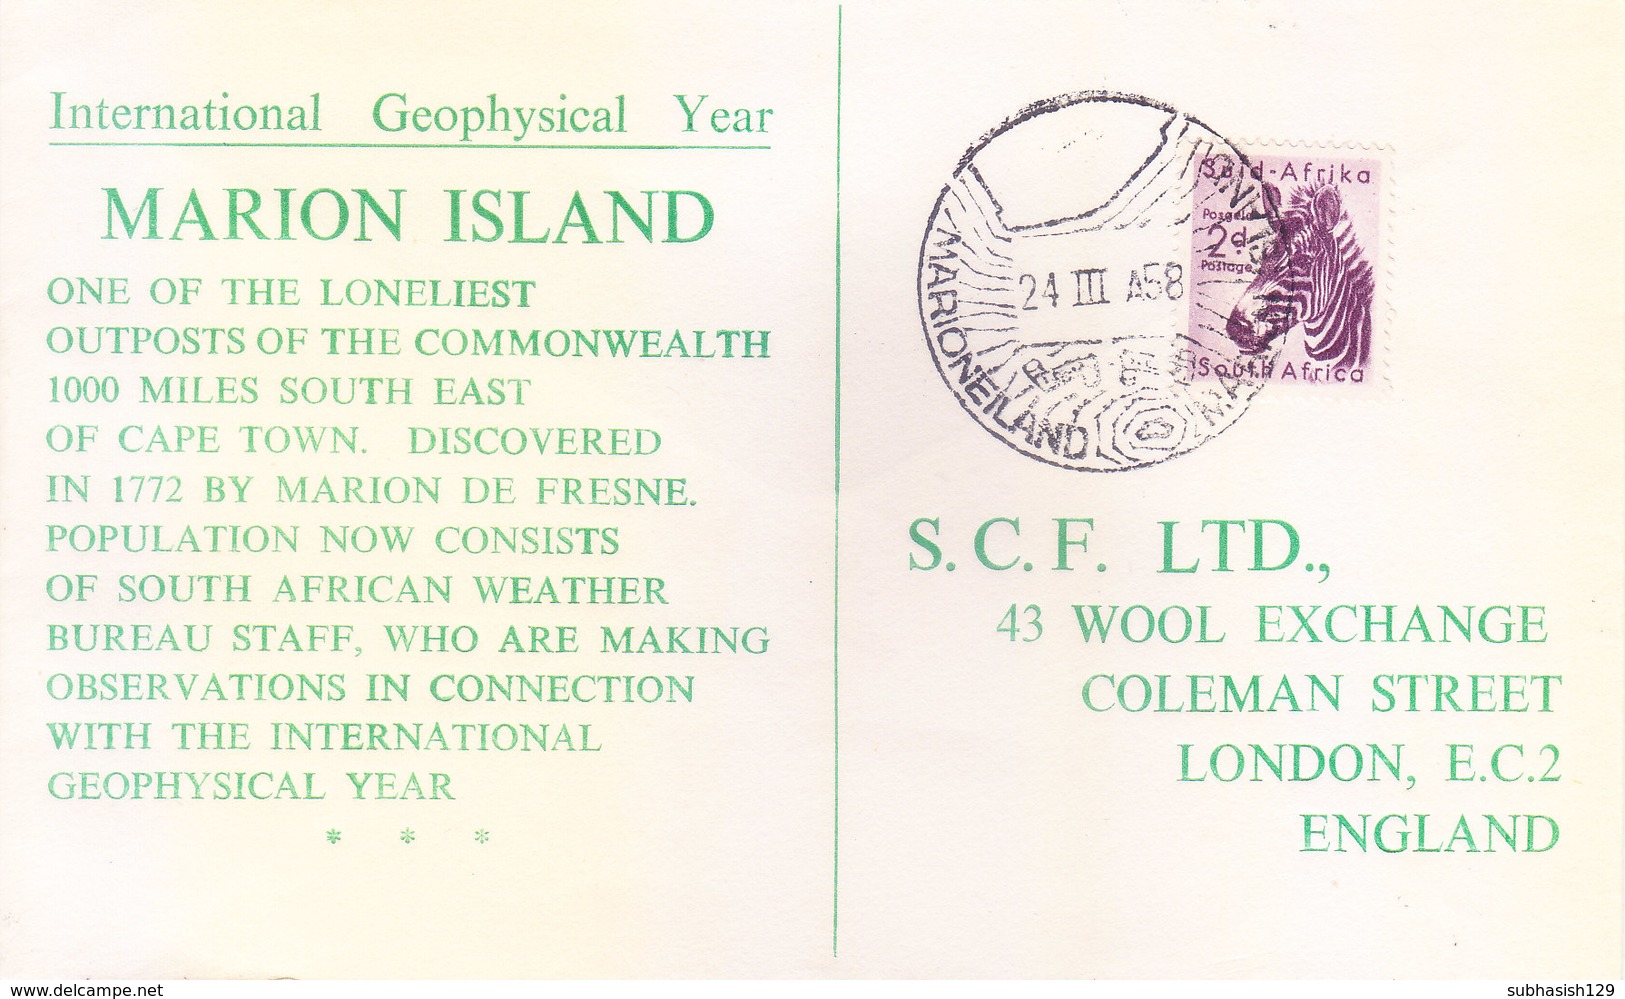 SOUTH AFRICA 1958 FIRST DAY COVER - MARION ISLAND - INTERNATIONAL GEOPHYSICAL YEAR - Unclassified